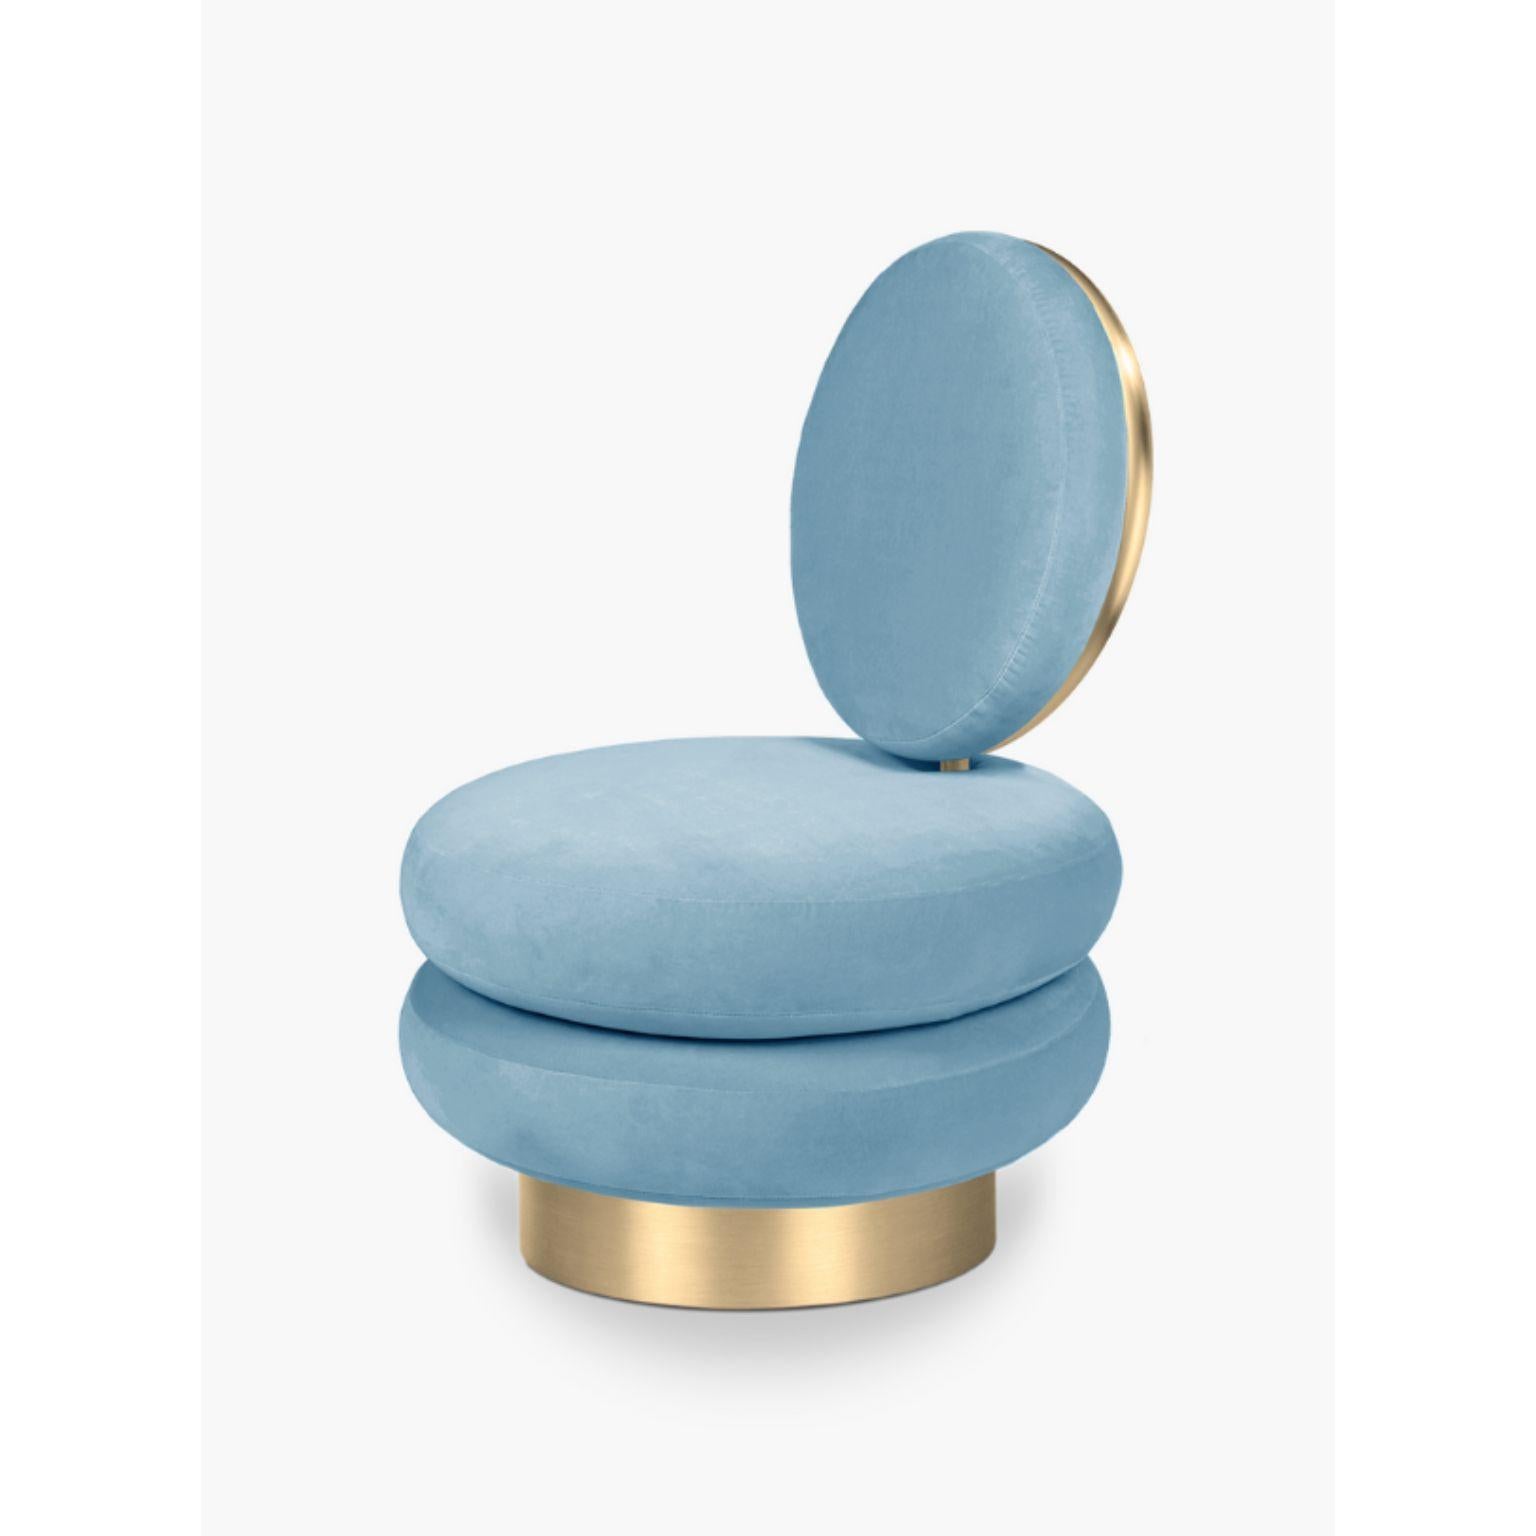 Grace armchair by Royal Stranger
Dimensions: W 70 x D 70 x H 96 cm 
Materials: Bouclé effect, polished brass
Color: Light blue. 
A round and soft shaped sofa with an elegant touch of goldish glamour and elegance. 

Royal Stranger is an